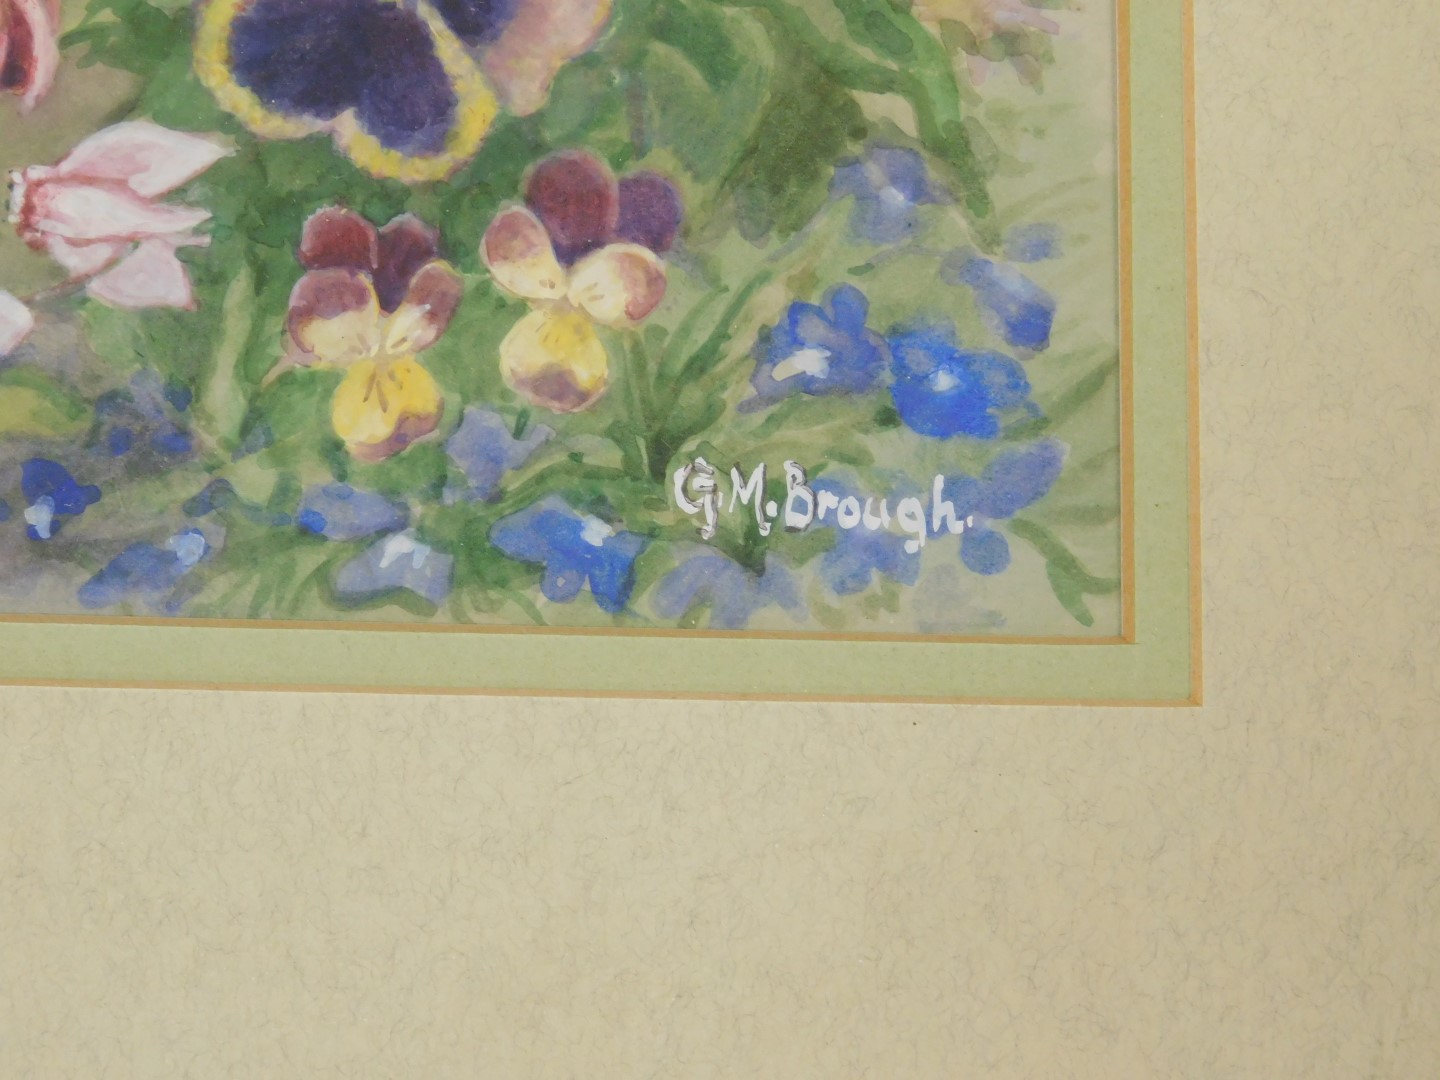 G M Brough. Four still lifes of flowers, watercolours, signed, 35cm x 24cm. - Image 3 of 9